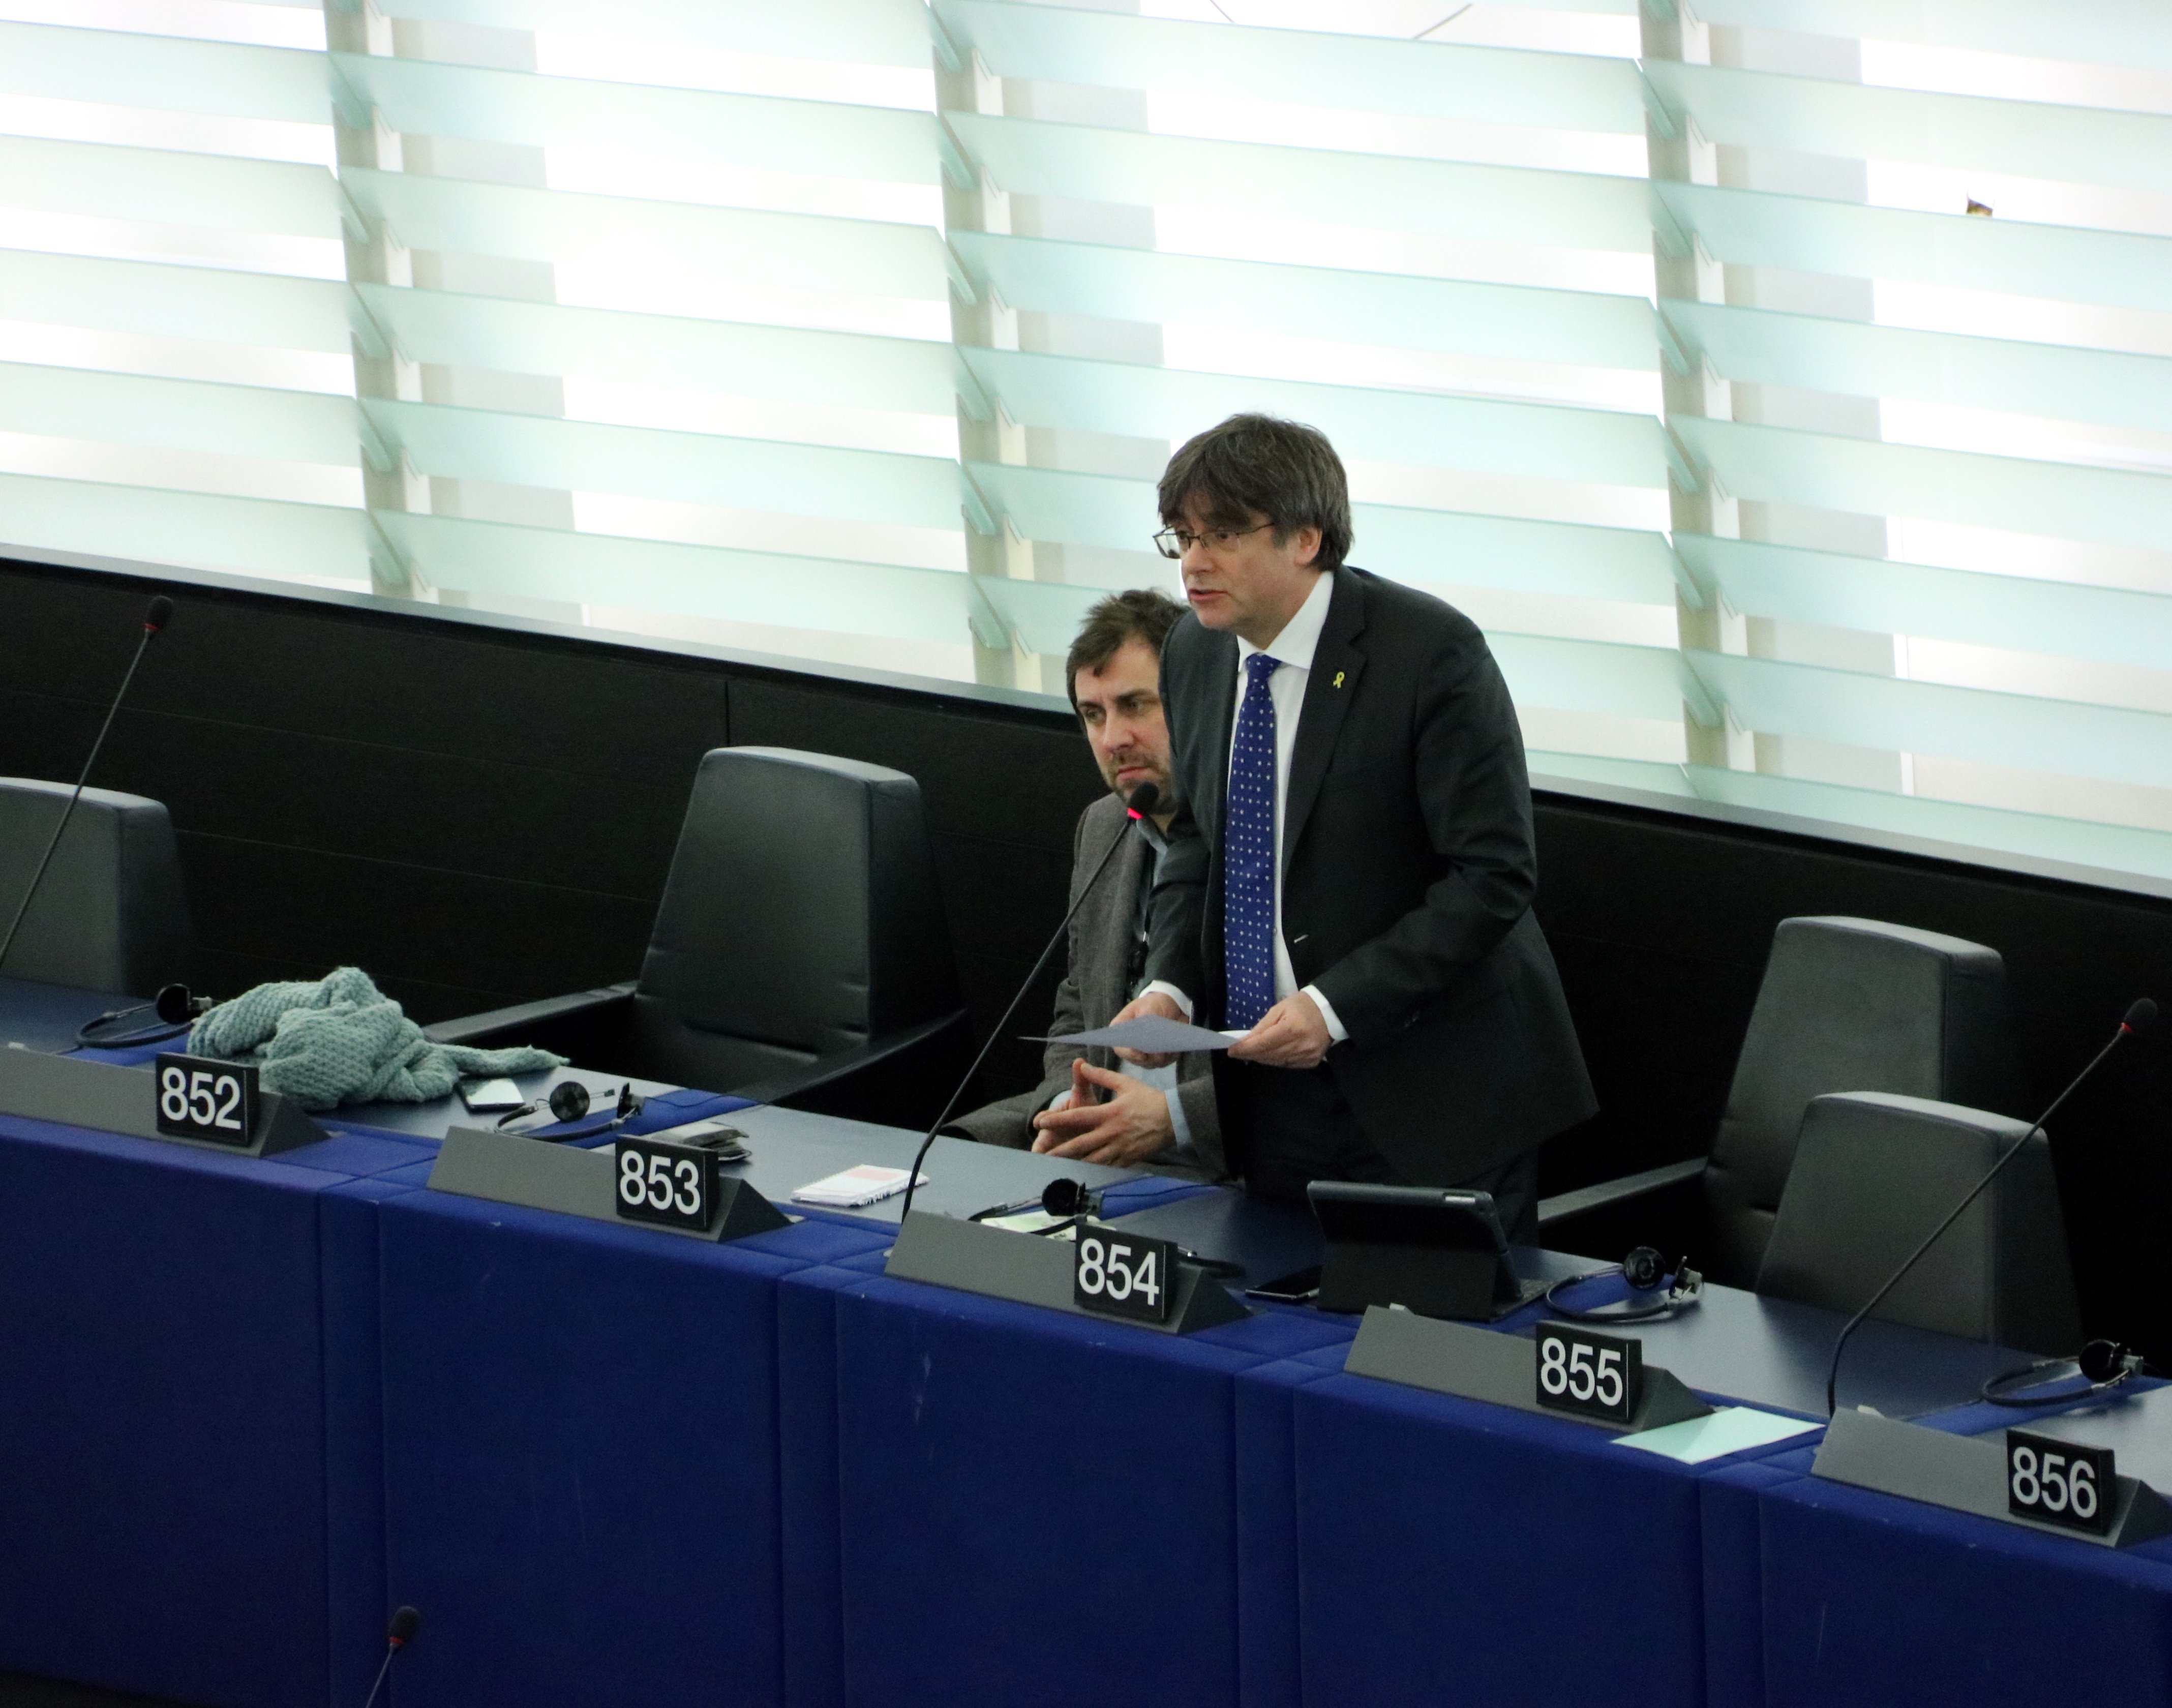 VIDEO | Puigdemont tells EU Parliament a negotiated solution on Catalonia must be found